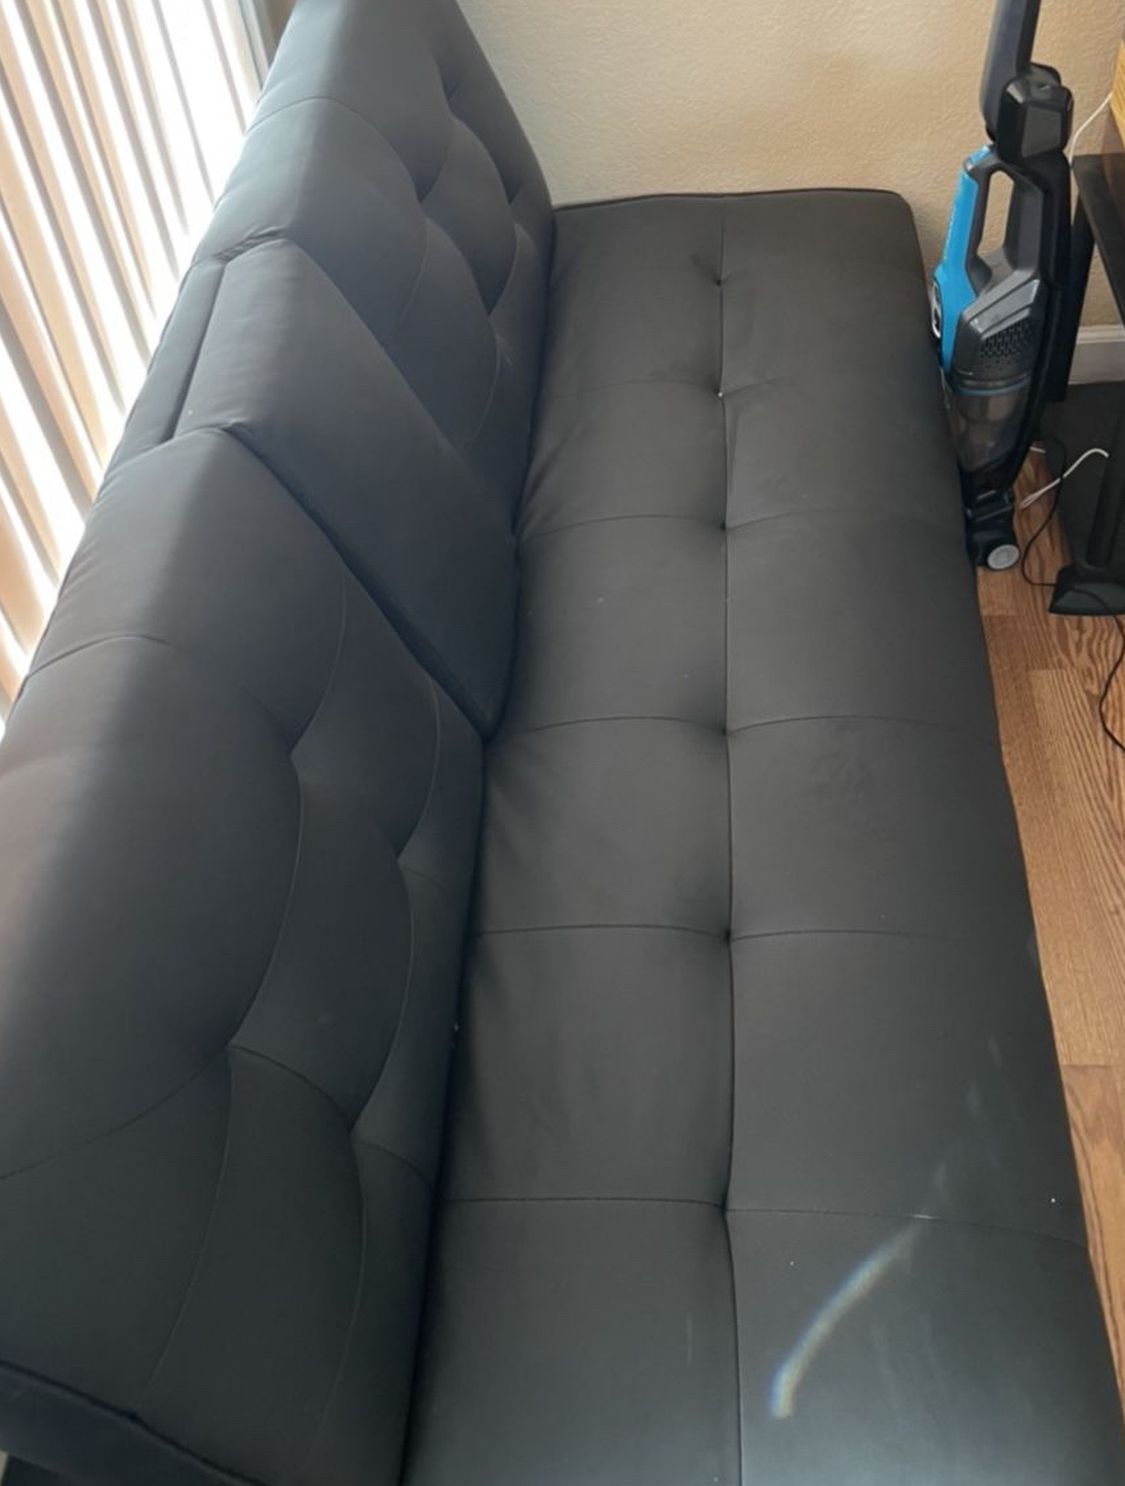 Black Leather Couch / Futon